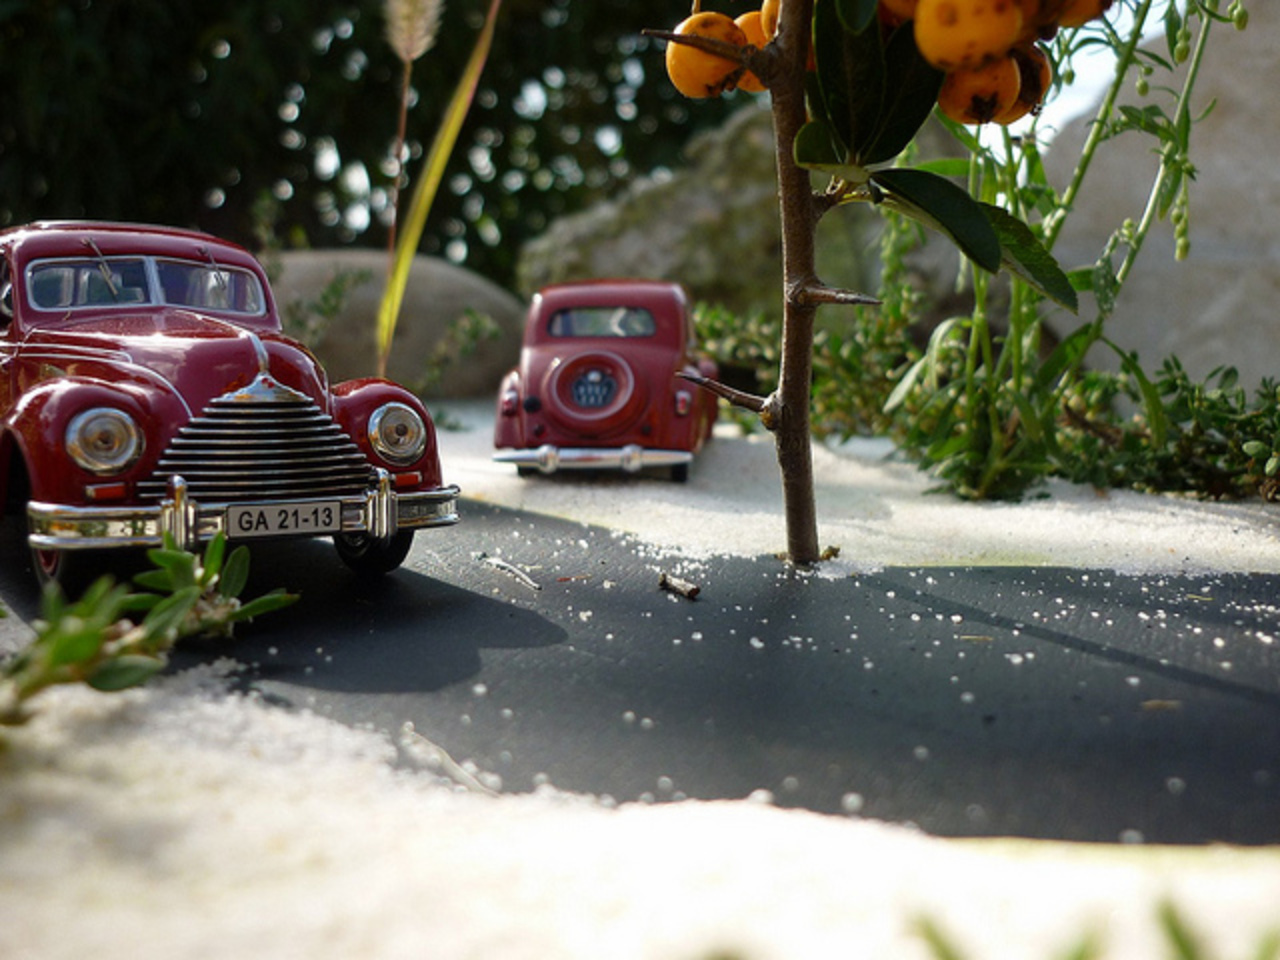 Flickr: The coches a escala/diecast Pool